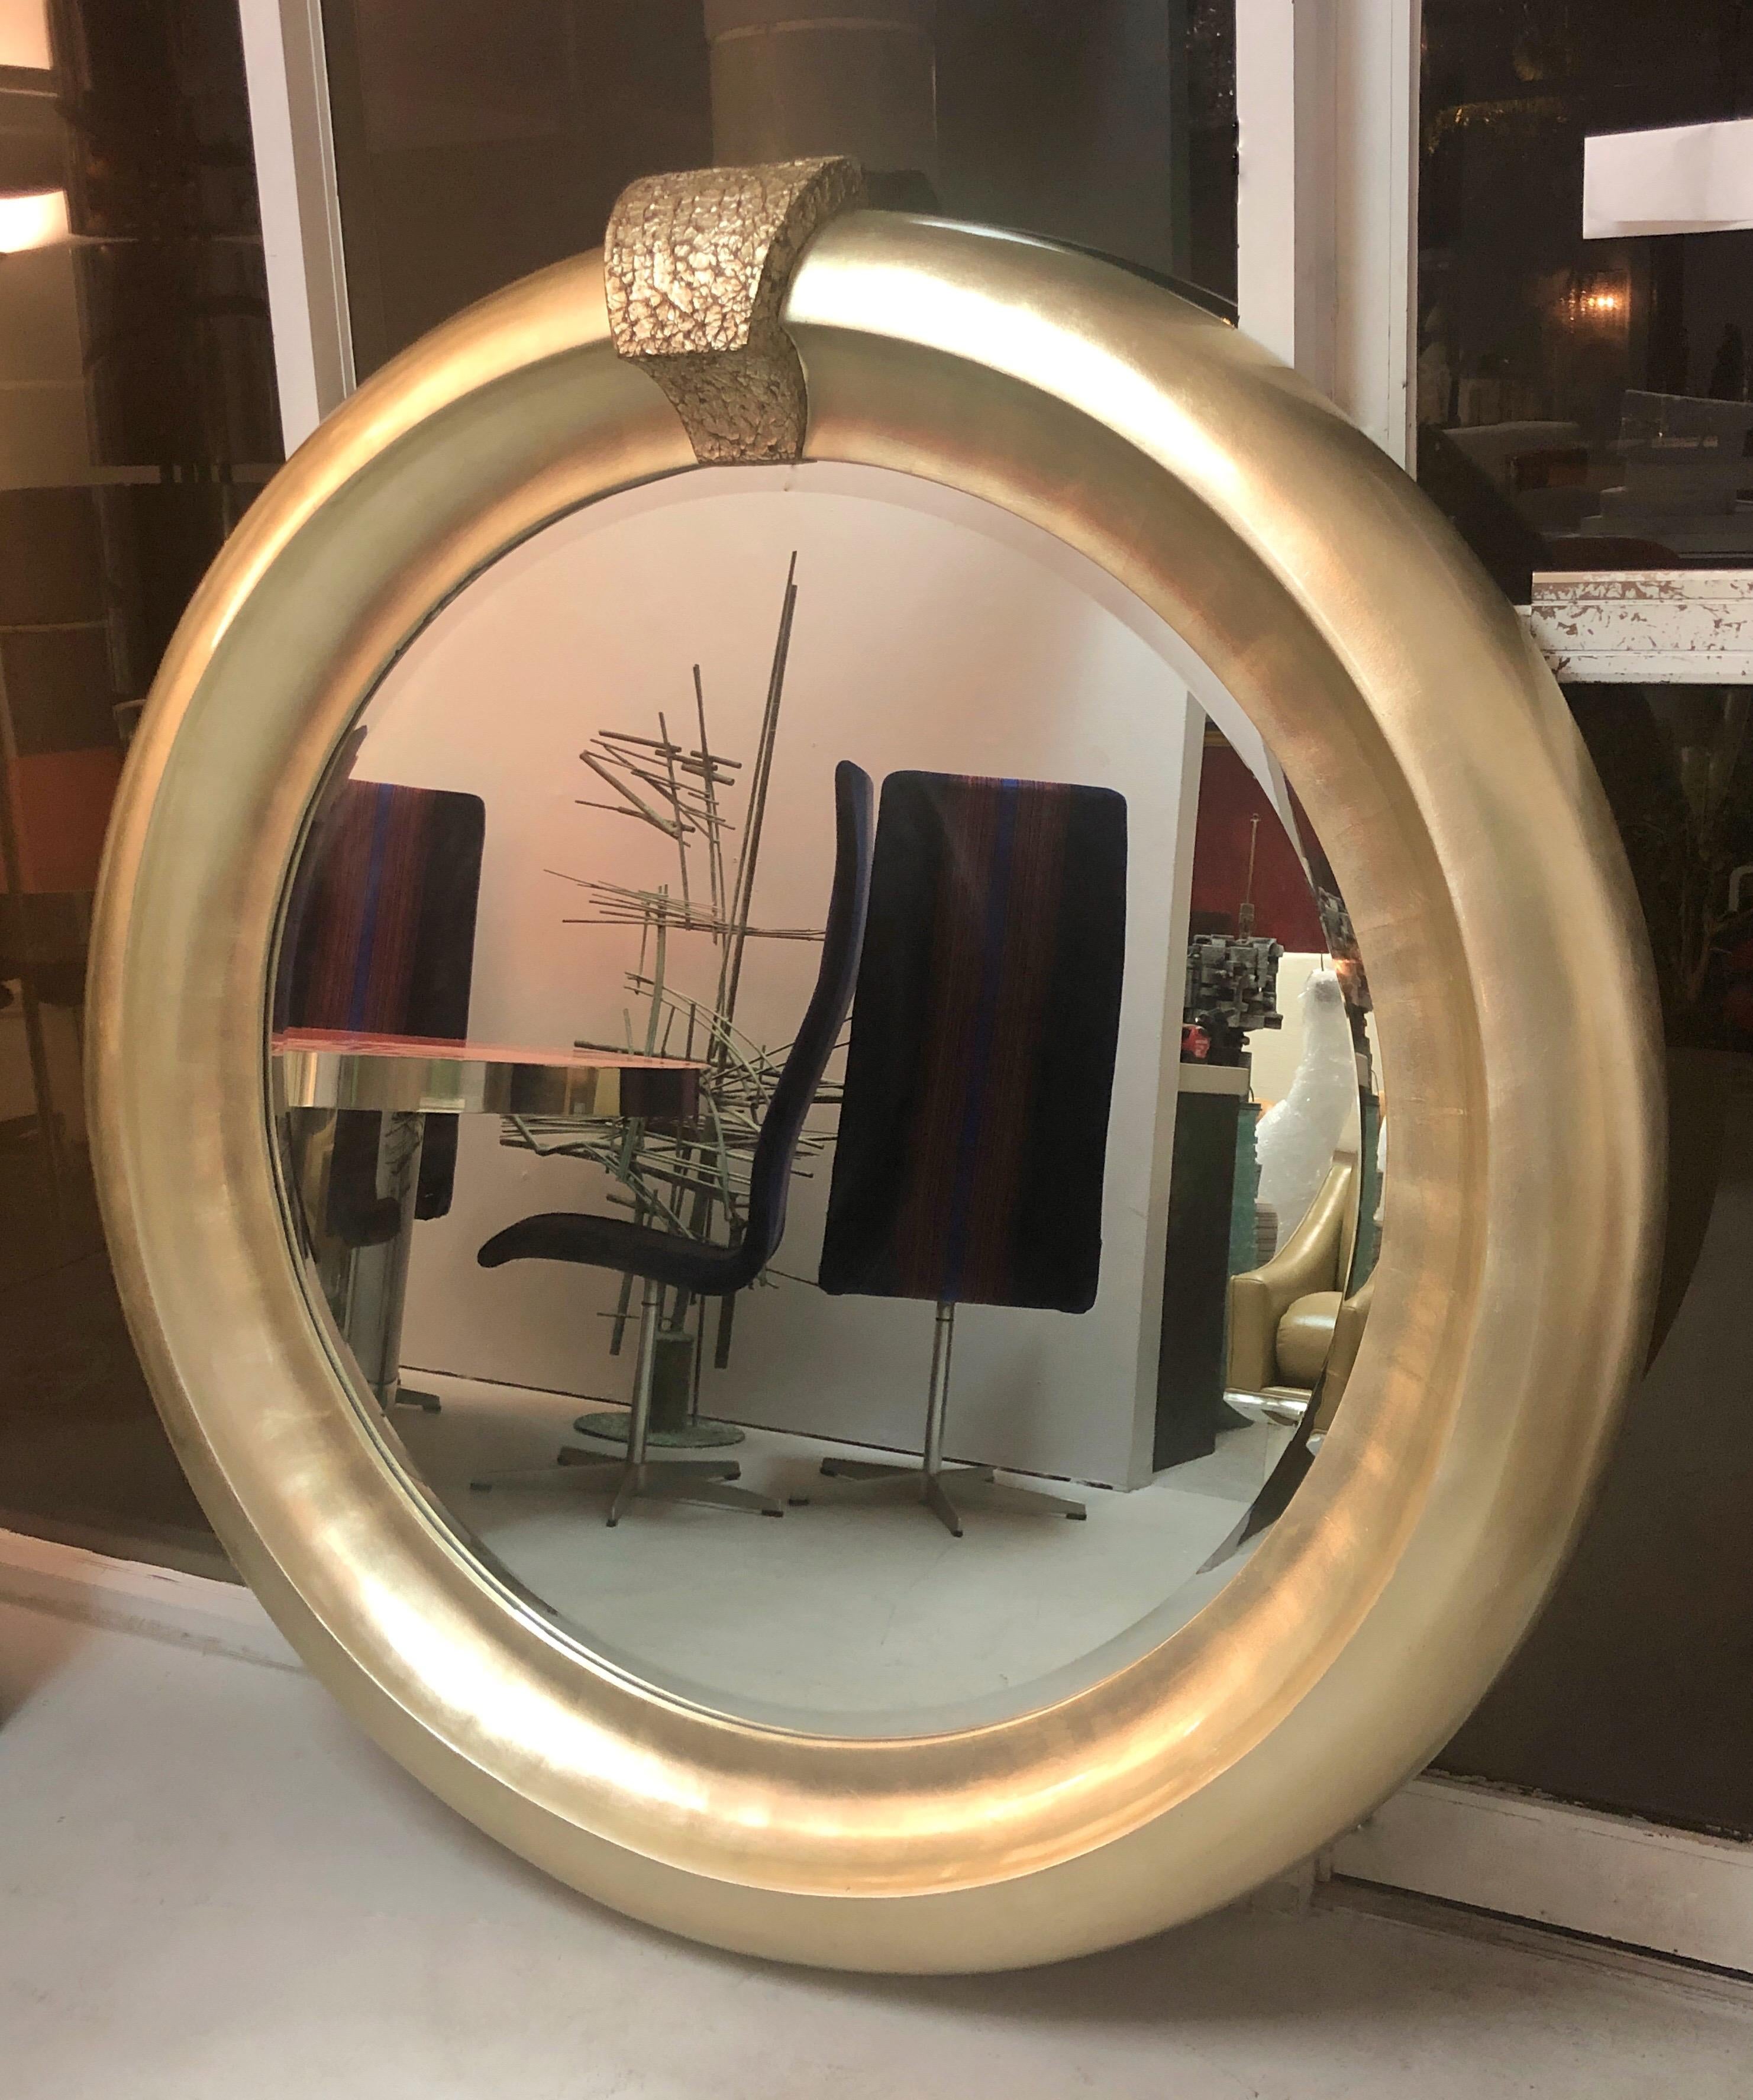 A monumental mirror by Jimeco. It is 60